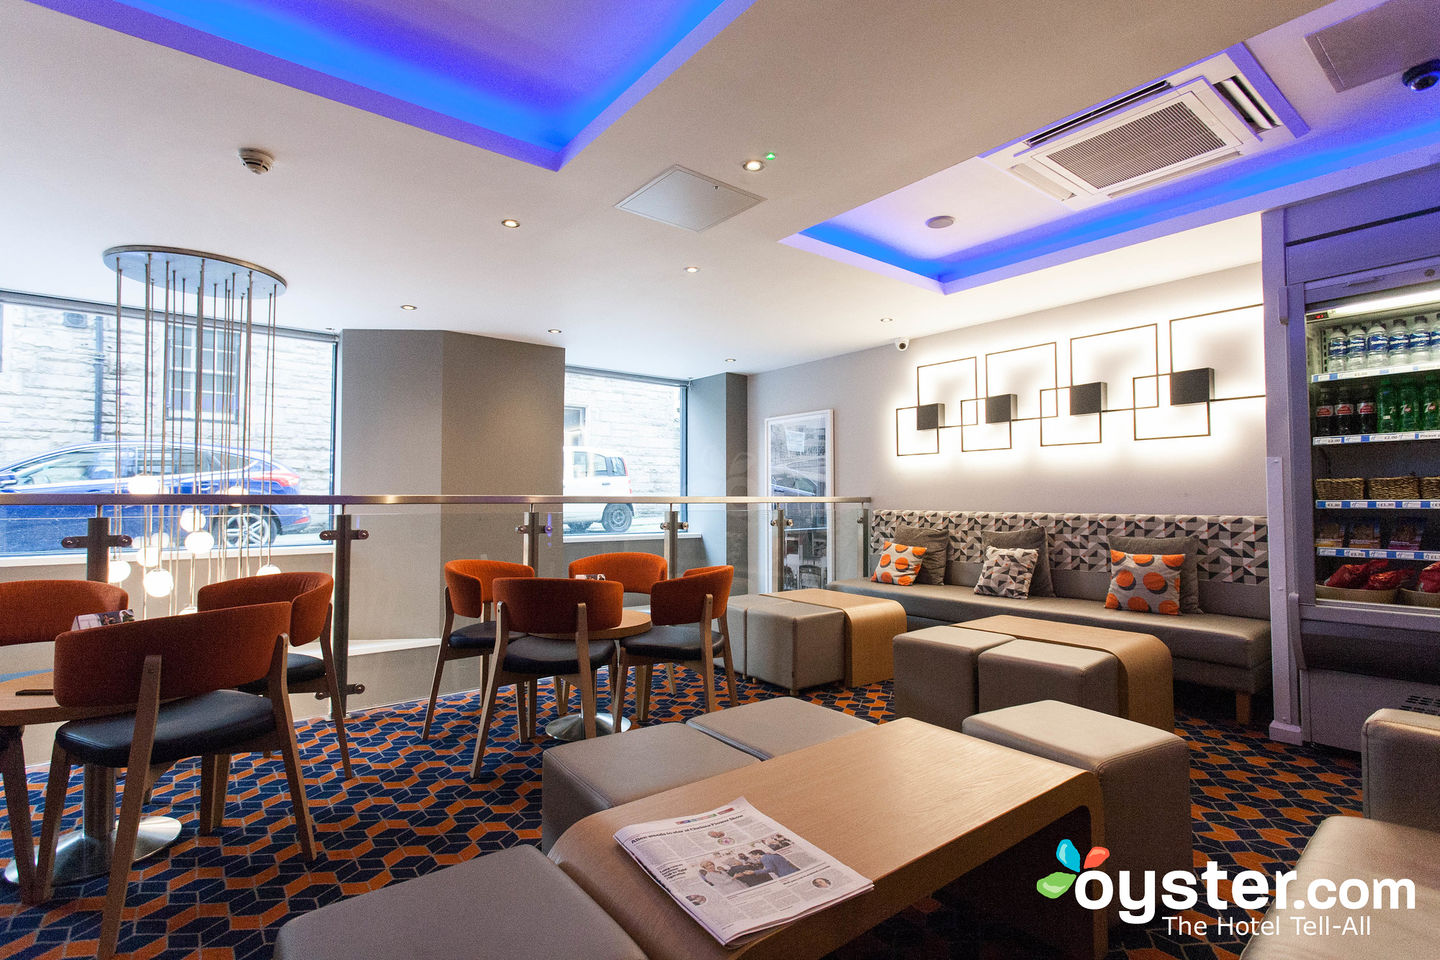 Holiday Inn Express Edinburgh Royal Mile Review What To Really Expect If You Stay